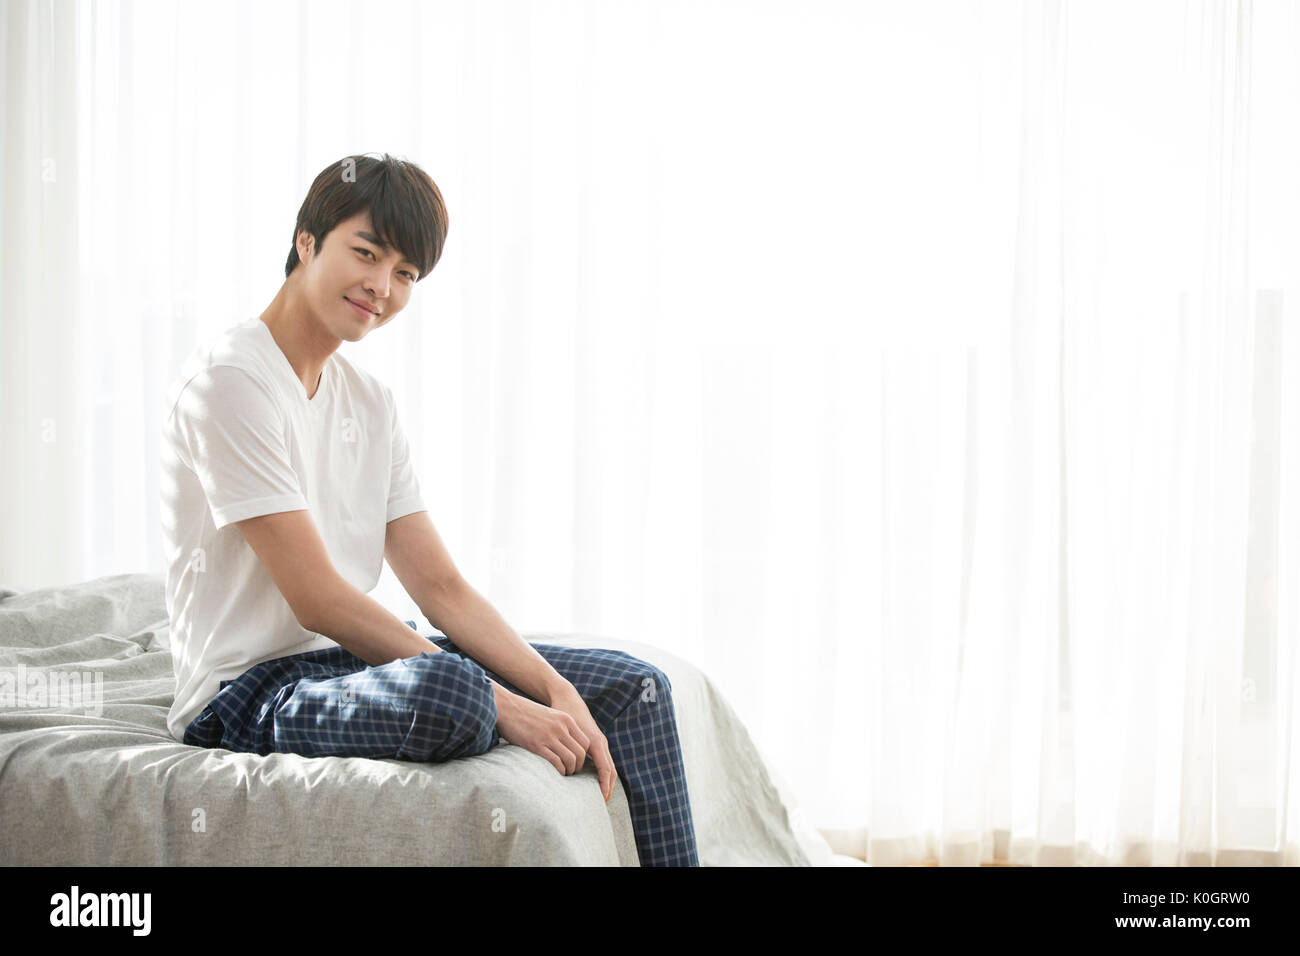 Homme seul Smiling sitting on bed Banque D'Images